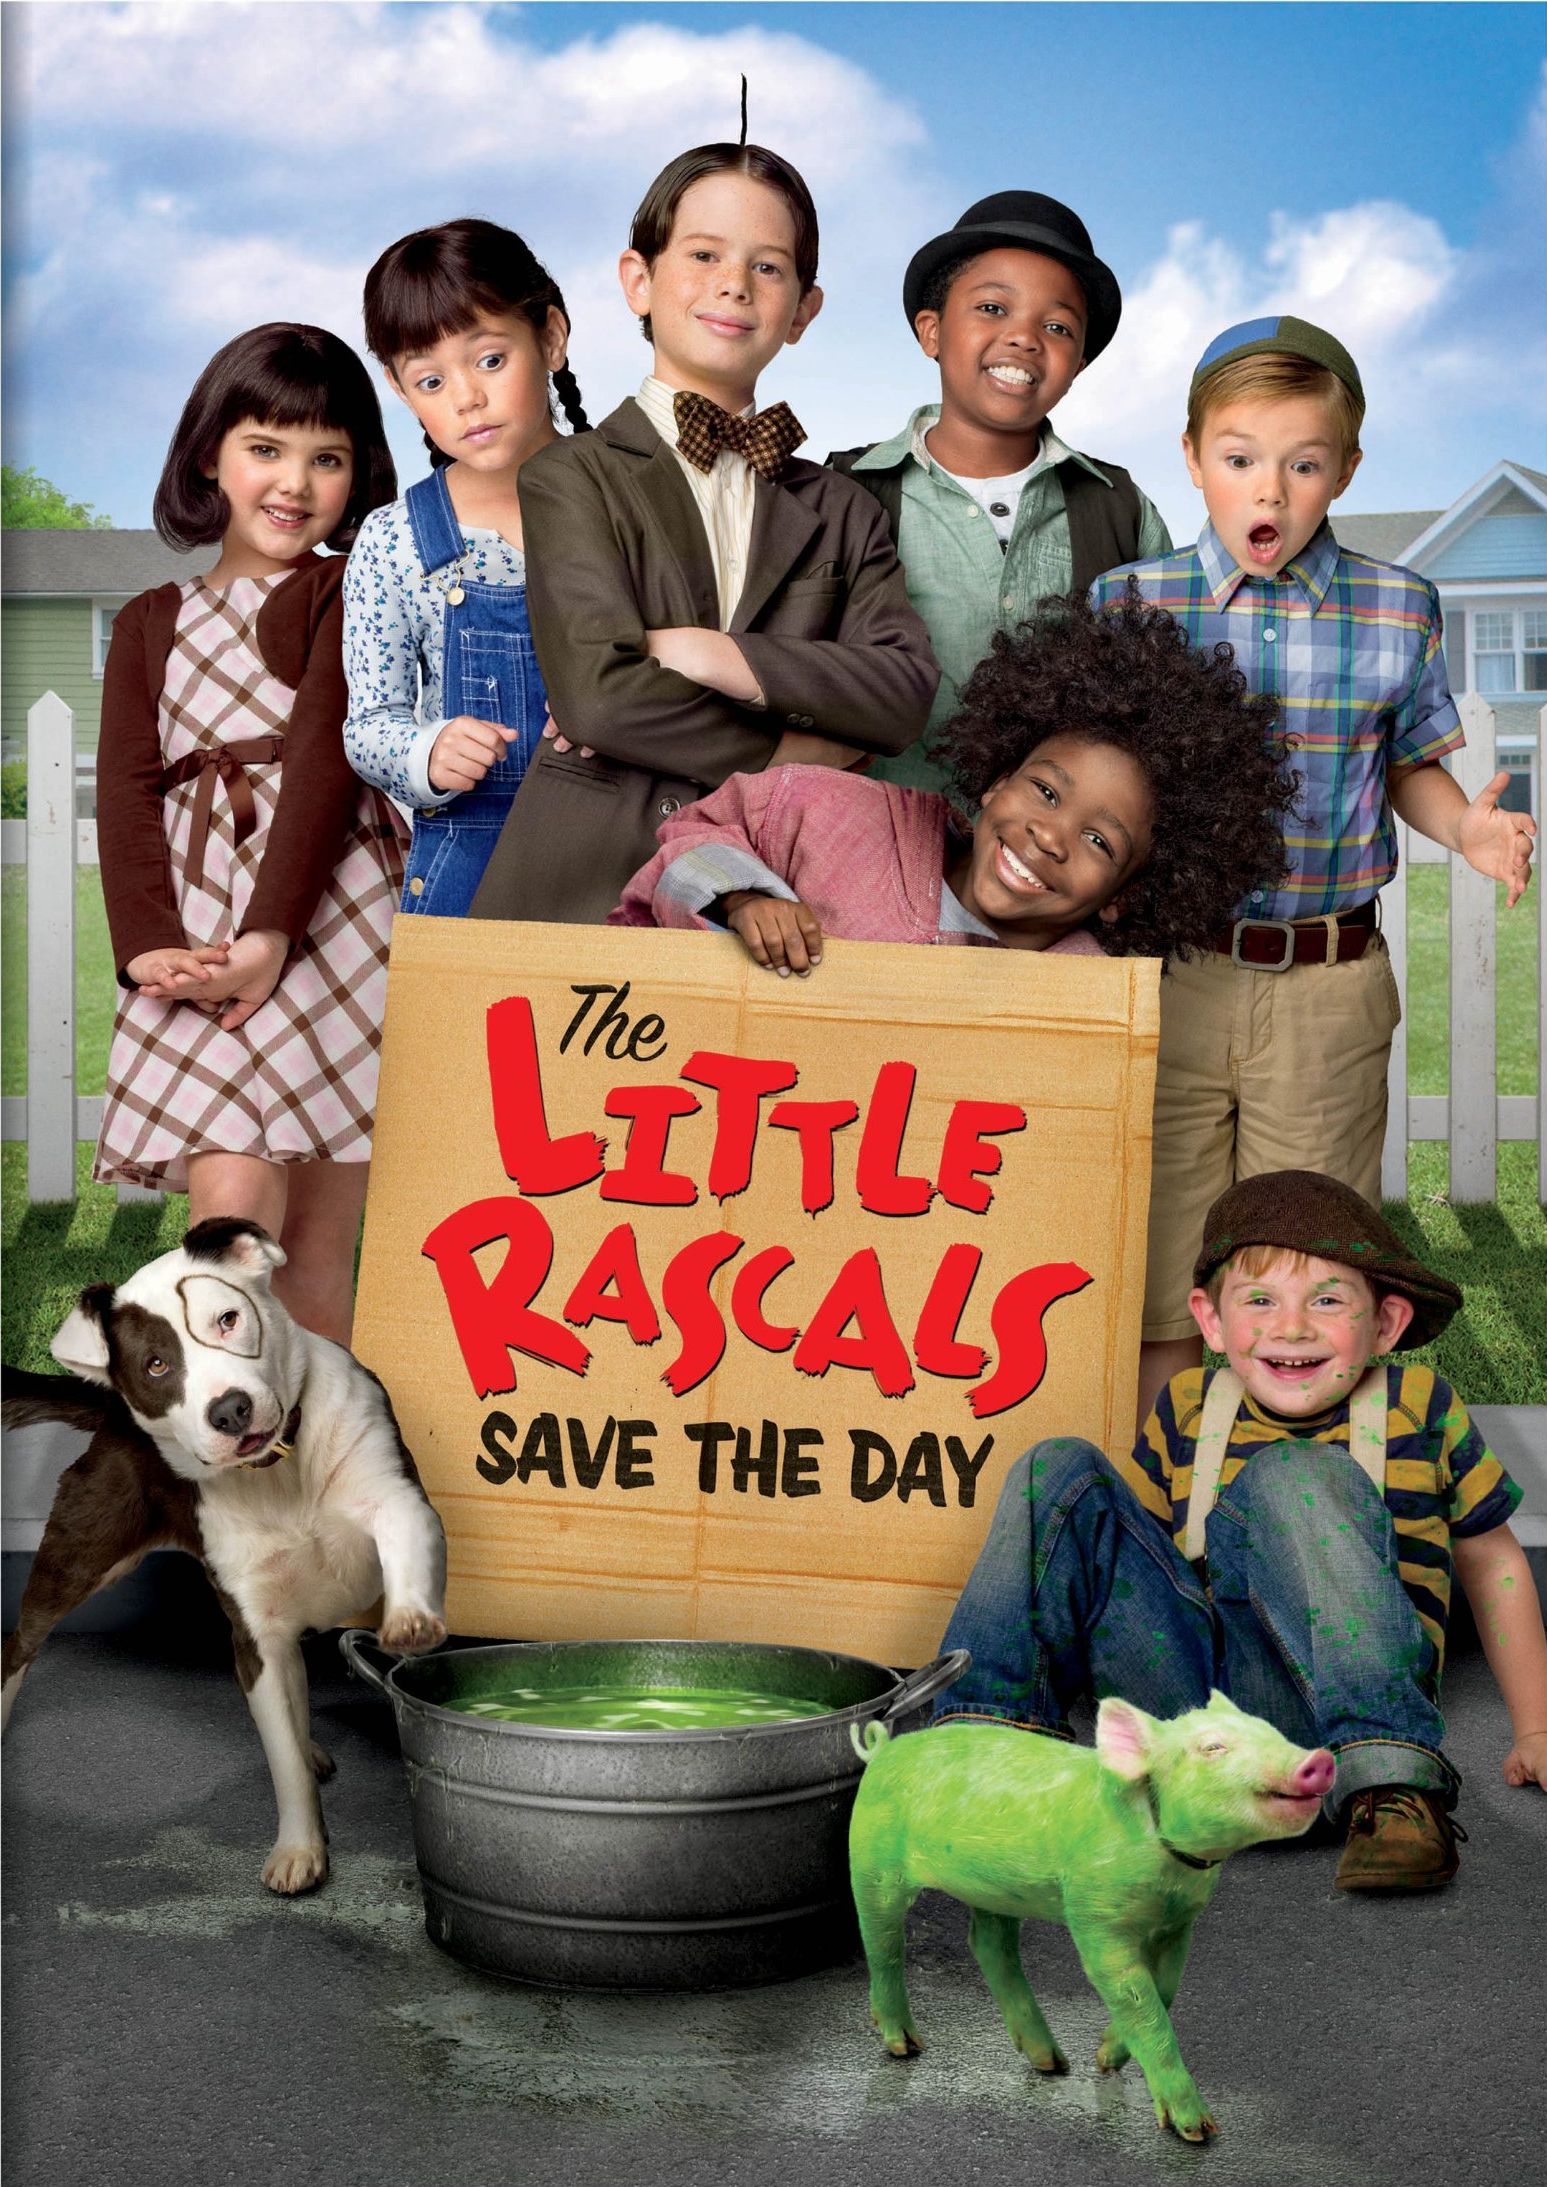 The Little Rascals Save the Day DVD Release Date April 1, 20141547 x 2187